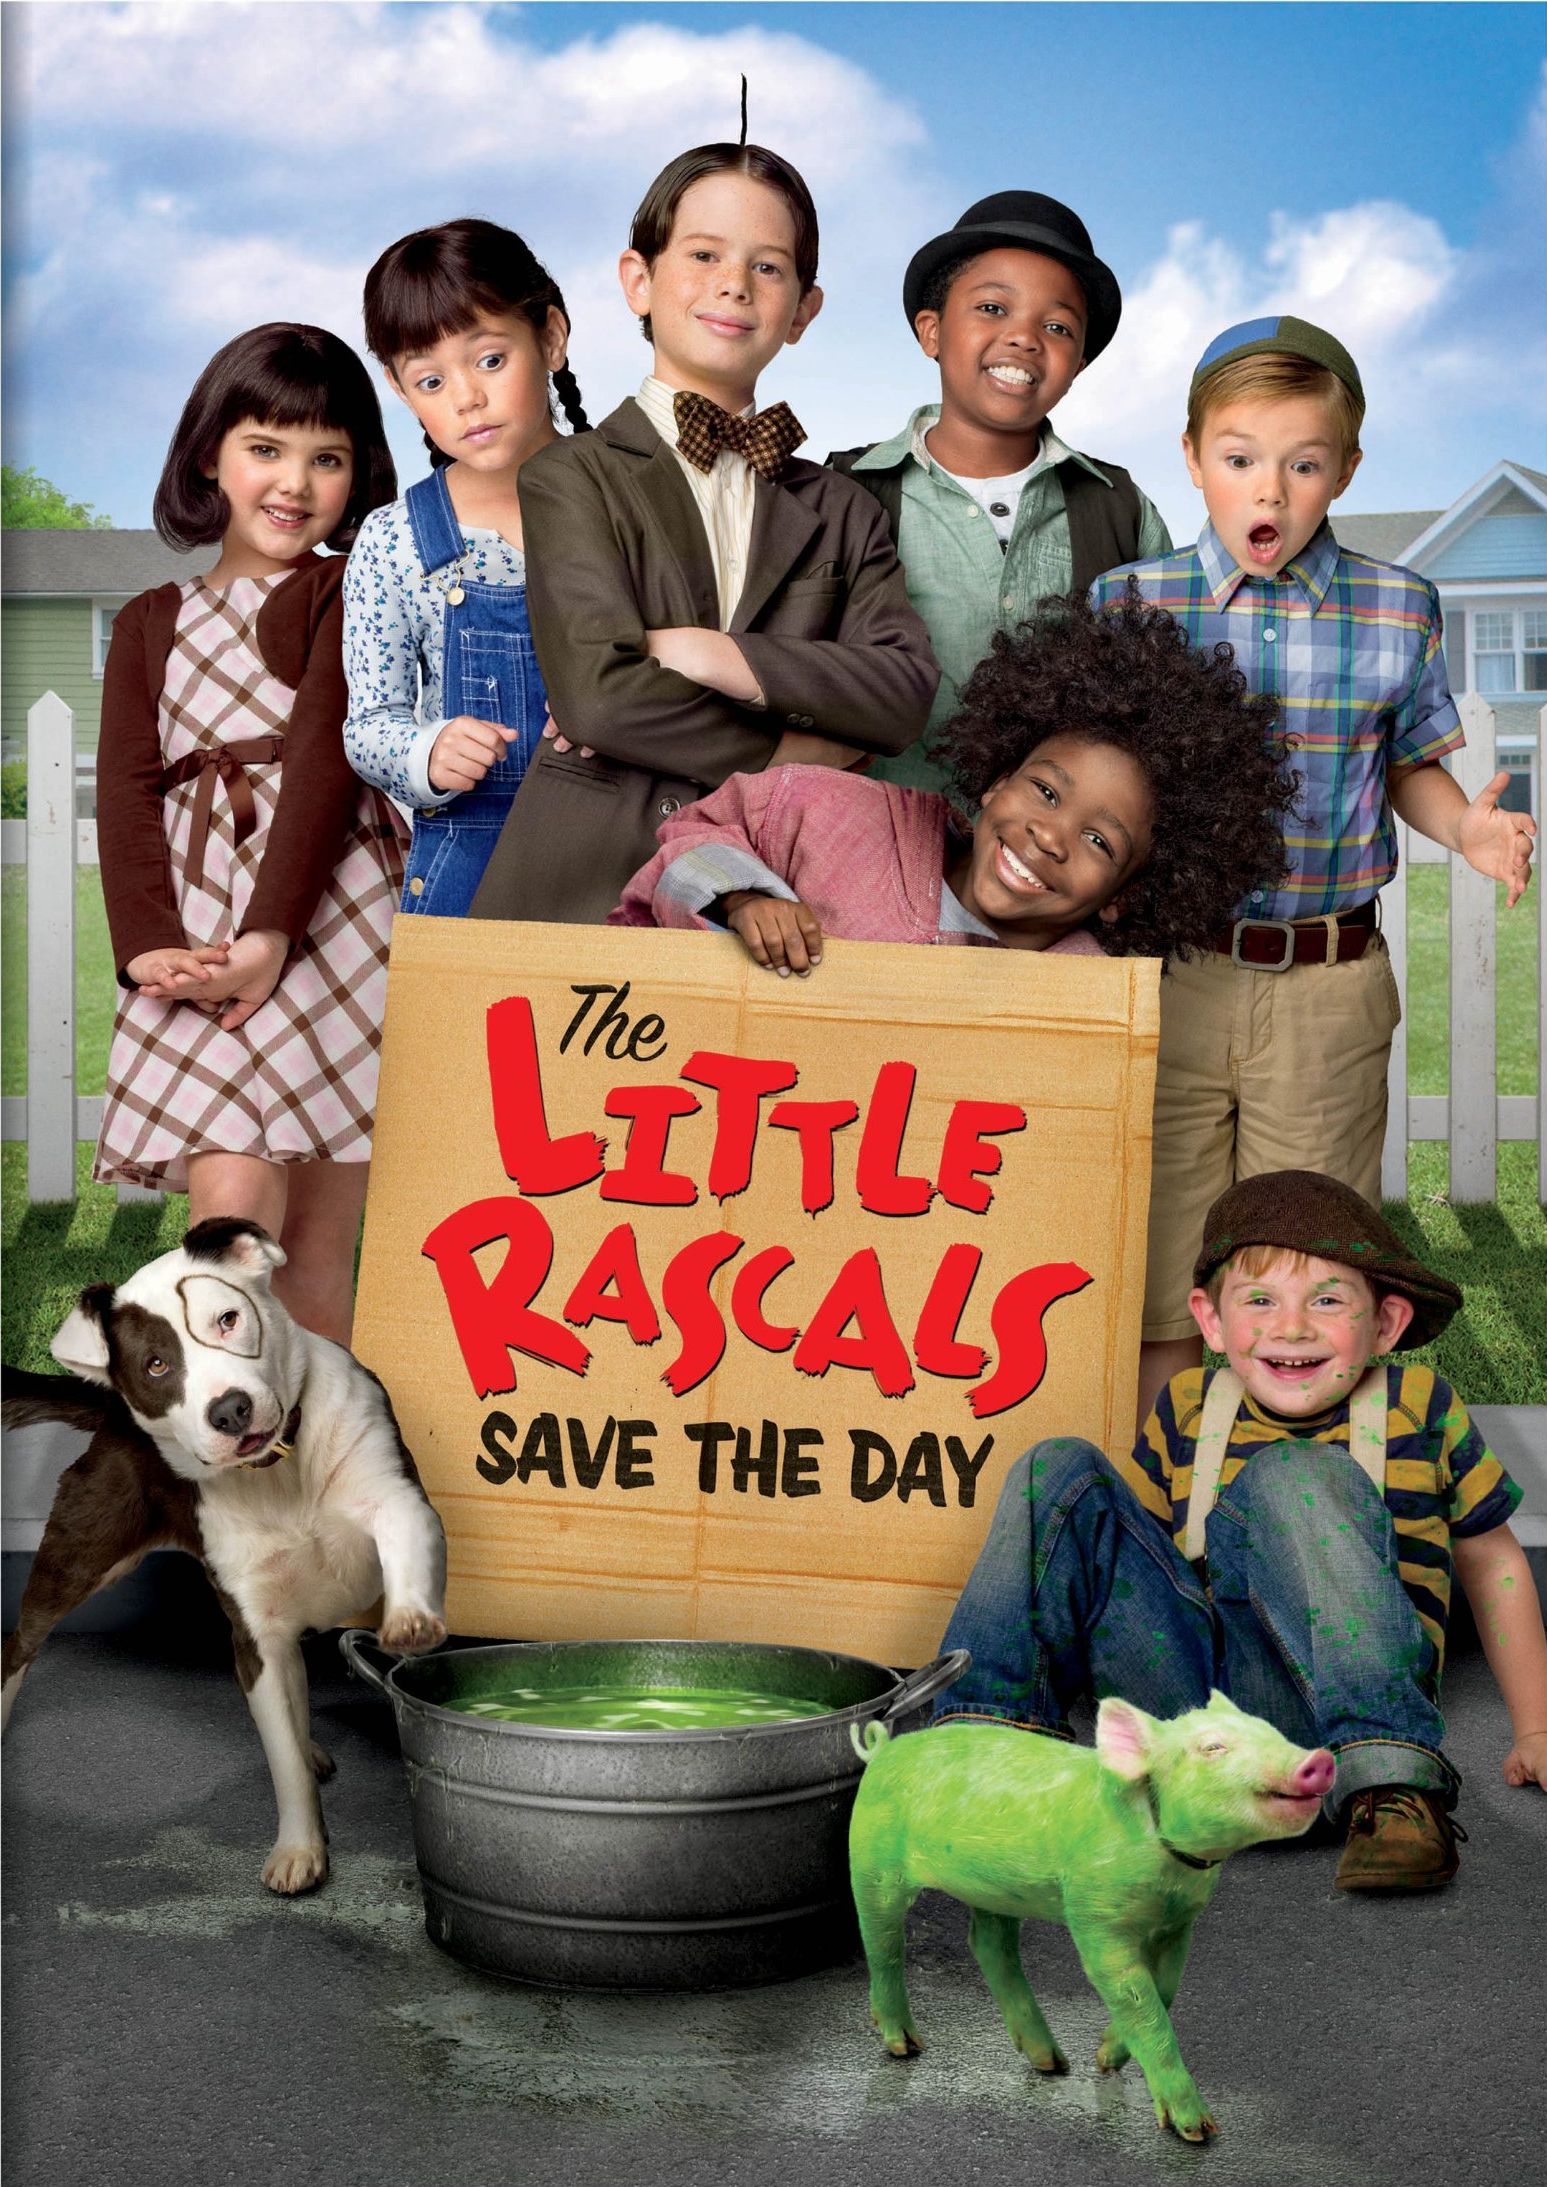 The Little Rascals Save the Day DVD Release Date April 1, 20141547 x 2187